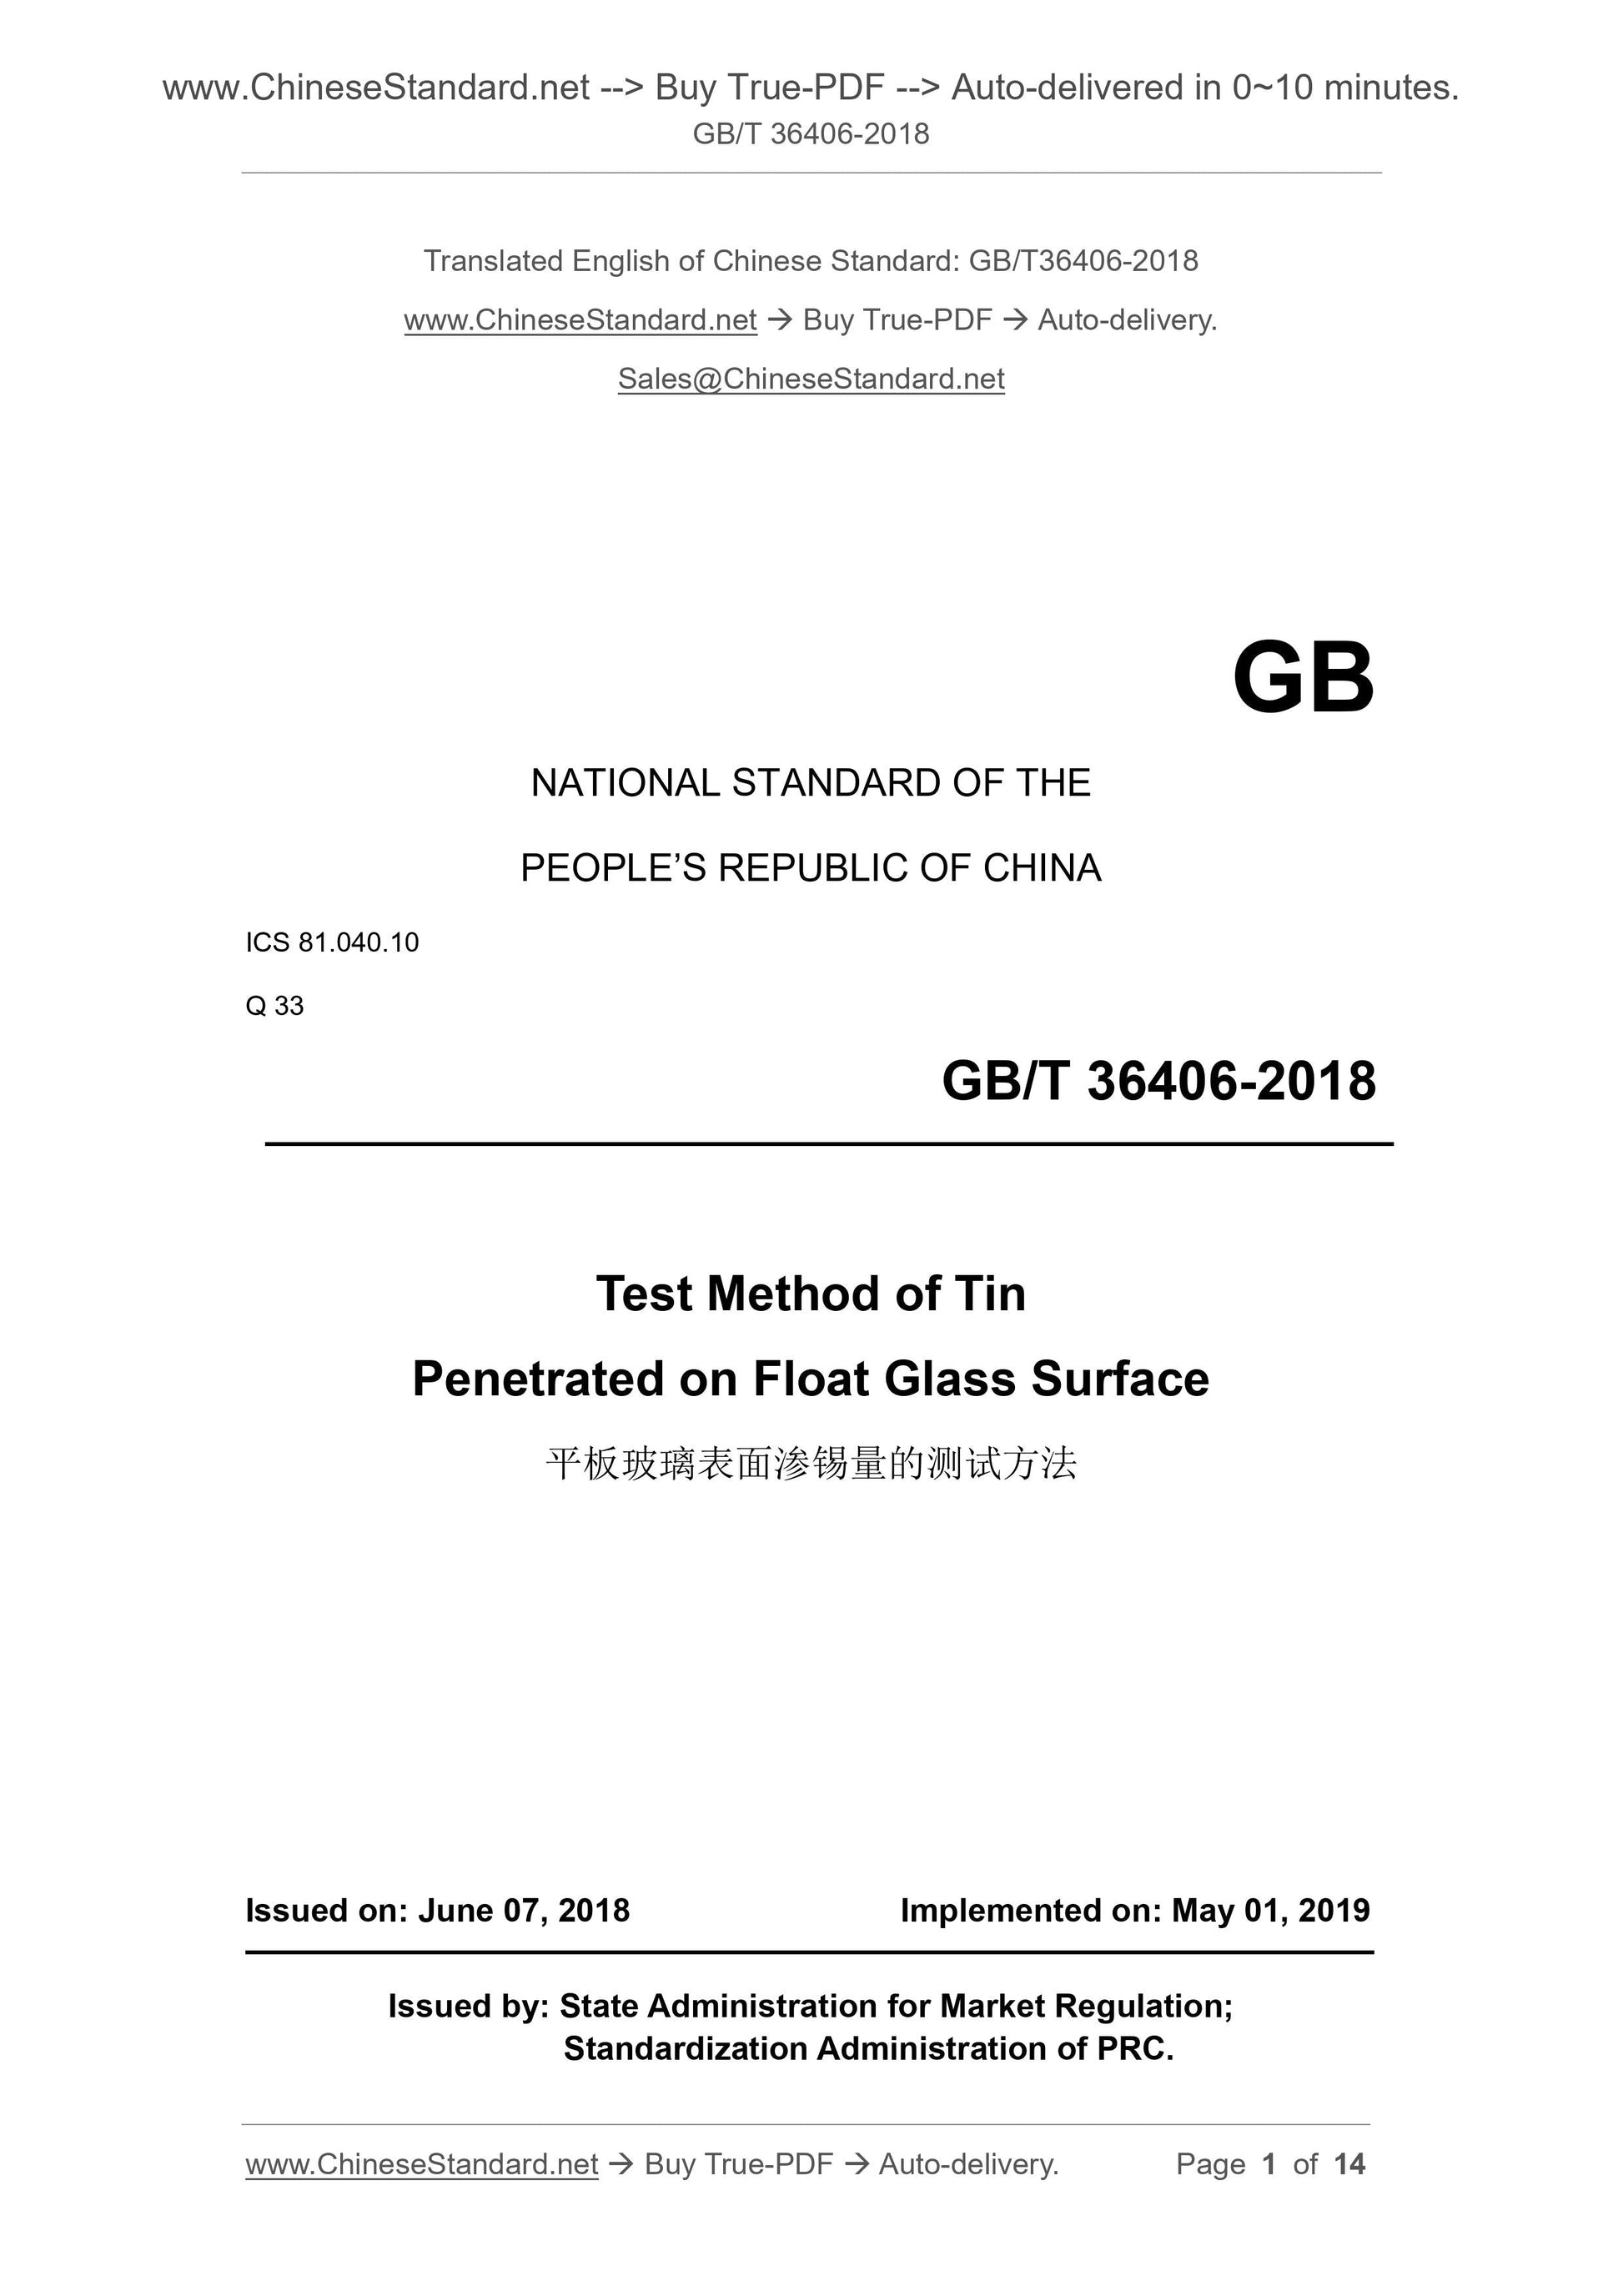 GB/T 36406-2018 Page 1